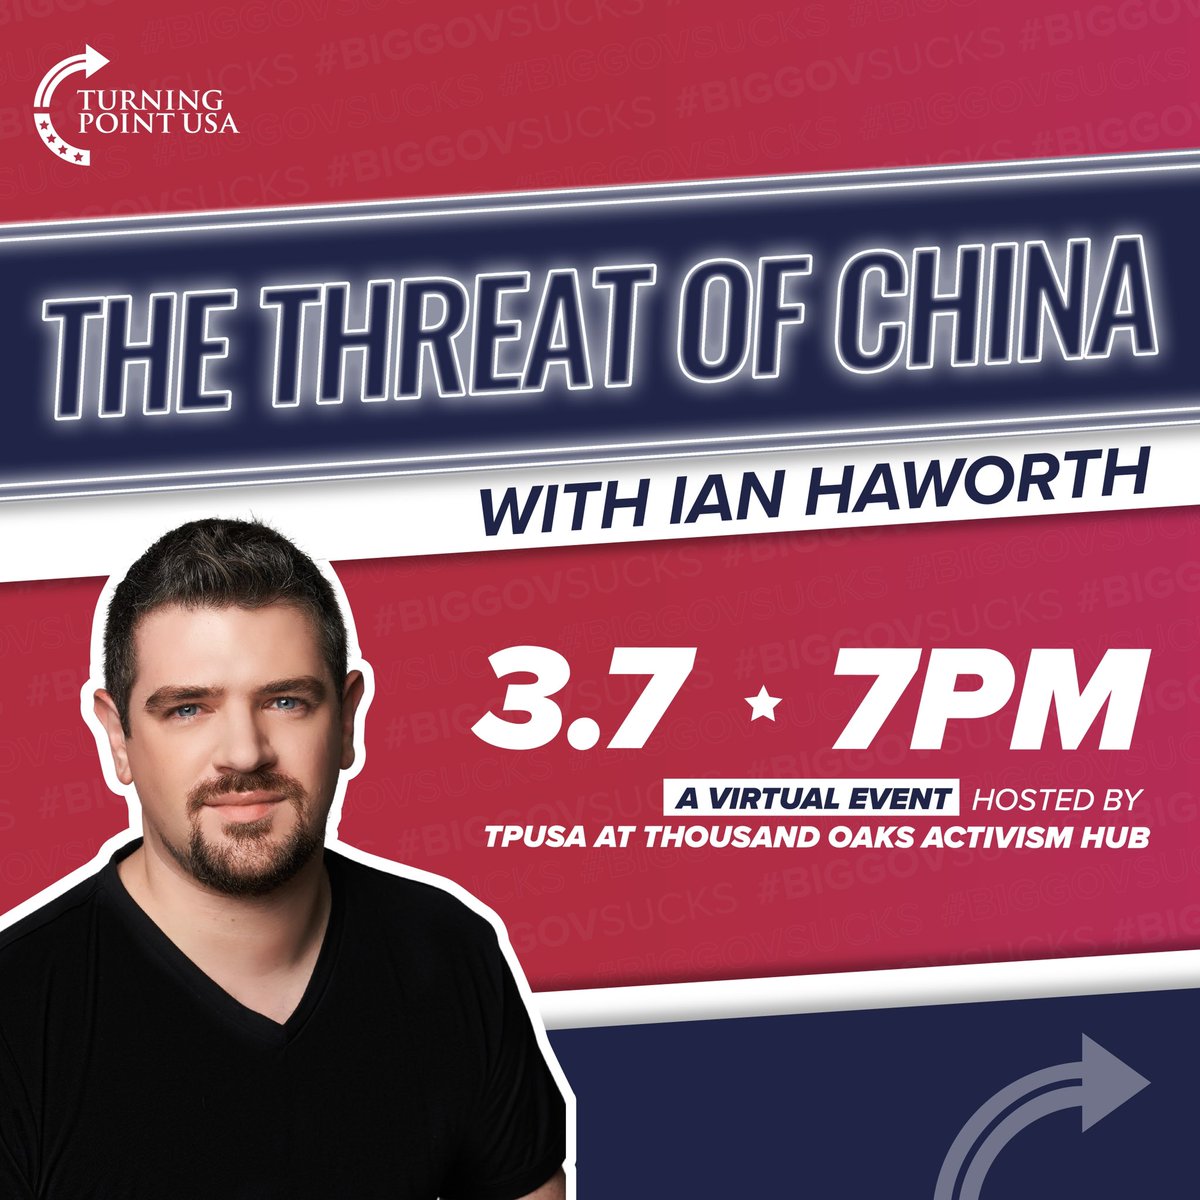 🇺🇸🔥 Learn all about The Threat of China with this super fun Zoom event!!! 🔥🇺🇸

🚨 RSVP: tinyurl.com/IanHaworthEvent 🚨

#losangeles #tpusa #turningpointusa #foryoupage #politics #politicalevents #charliekirk #biggovsucks #socialismsucks #ianhawarth #china